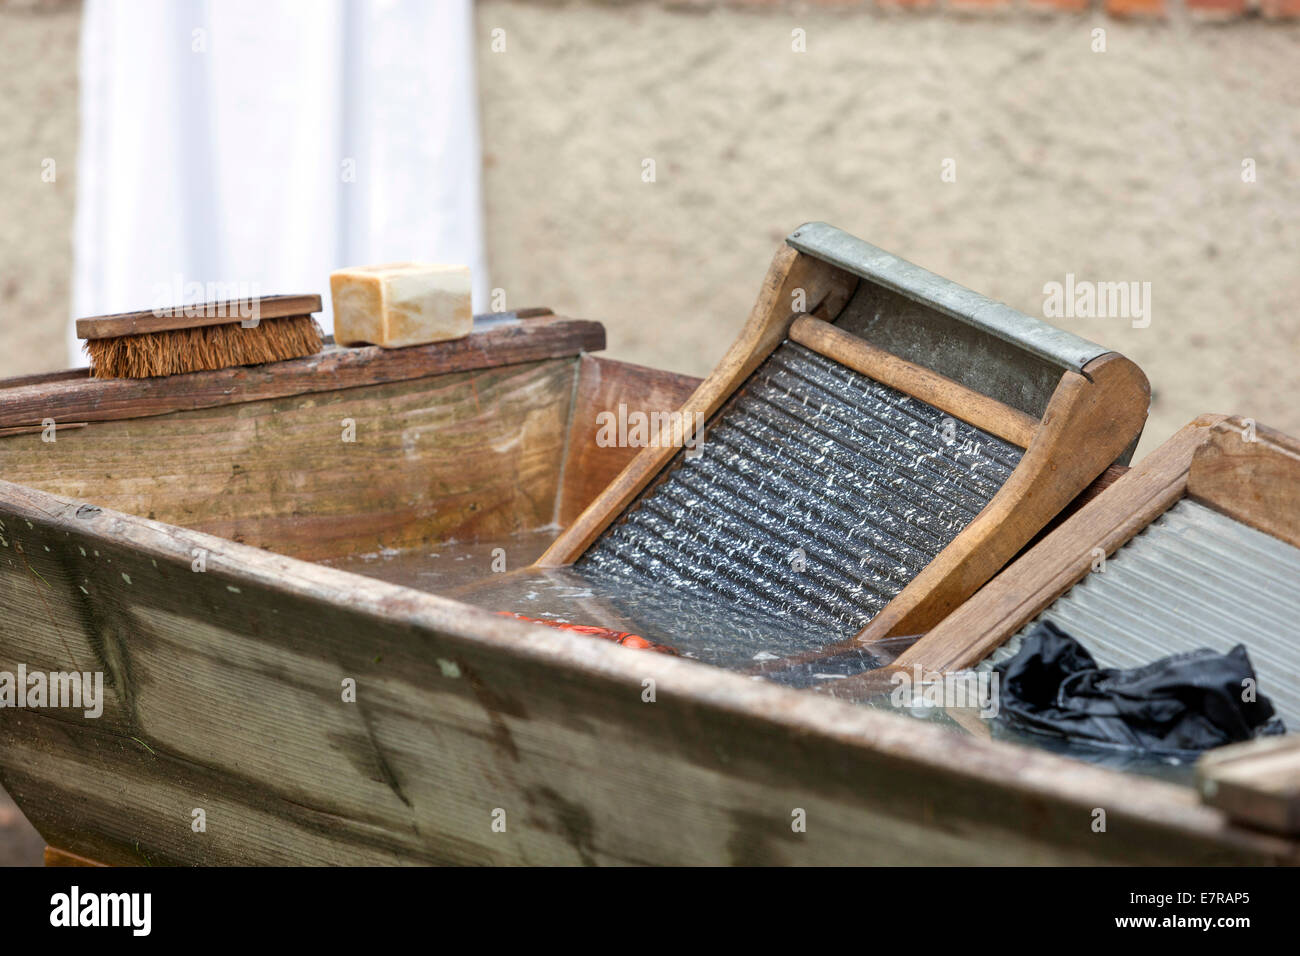 washing laundry at the old wooden washboard and wash tub clothing Stock Photo